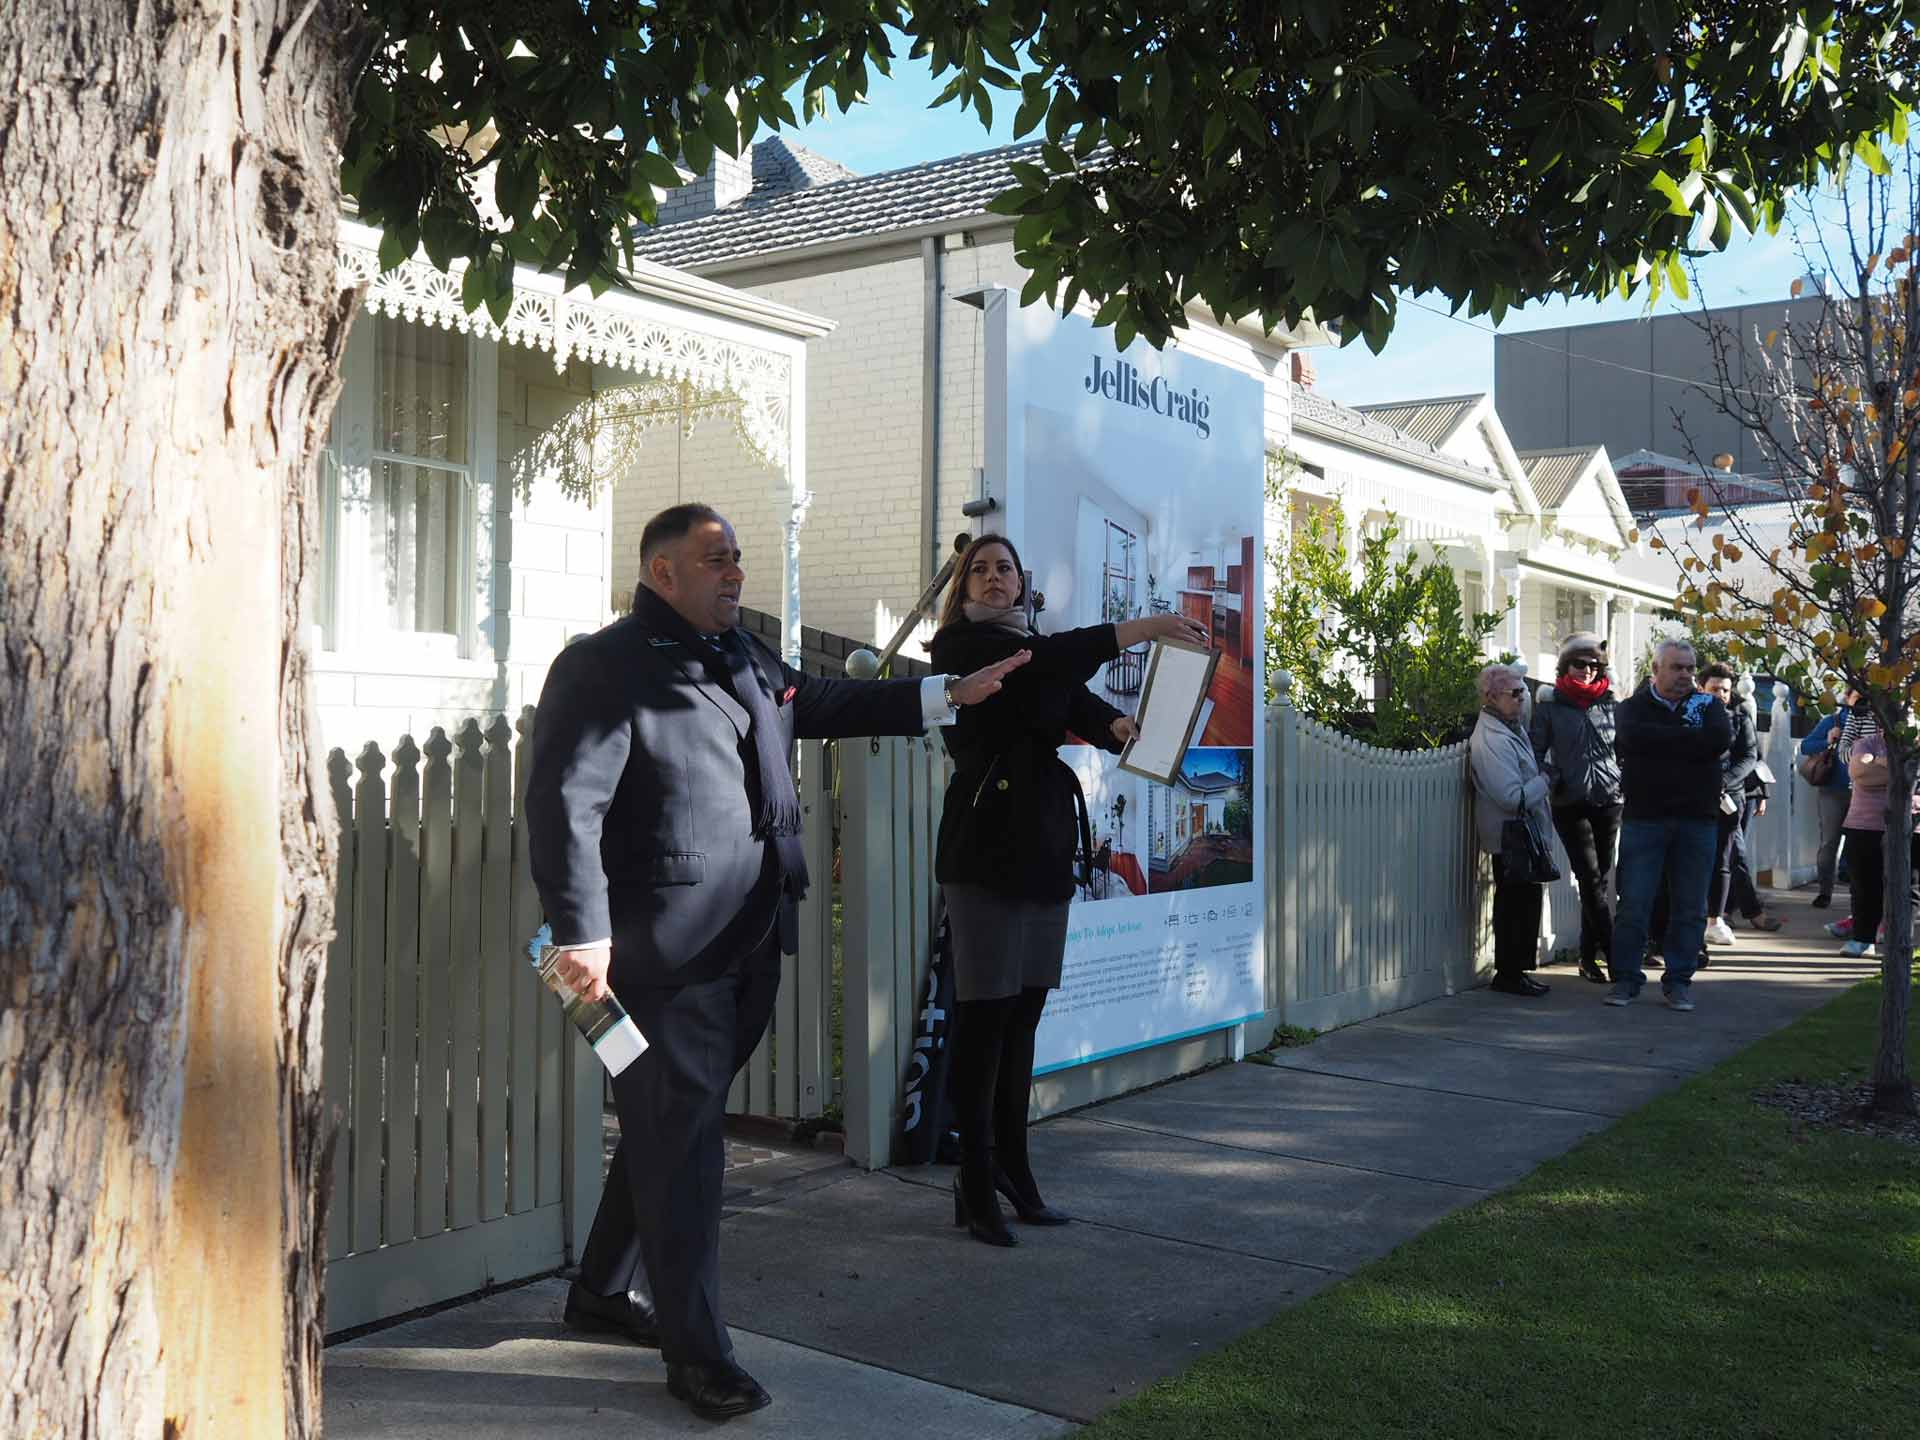 Auction snapshot - auction underway in front of picket fence